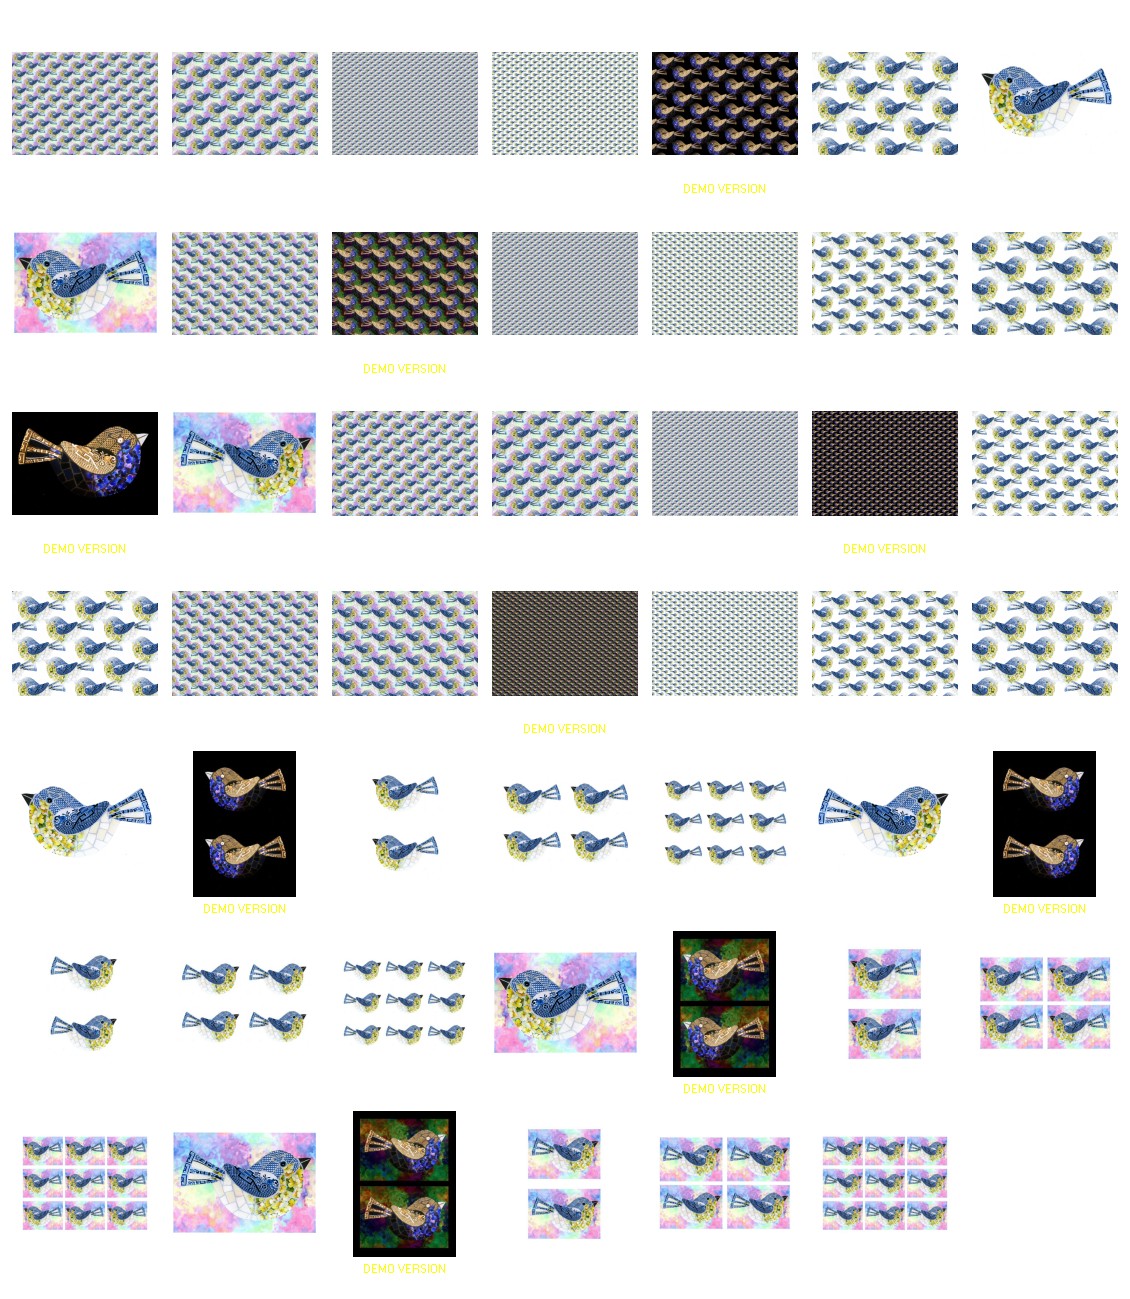 Tiled Effect Birds - Set 03 - 48 Pages to Download